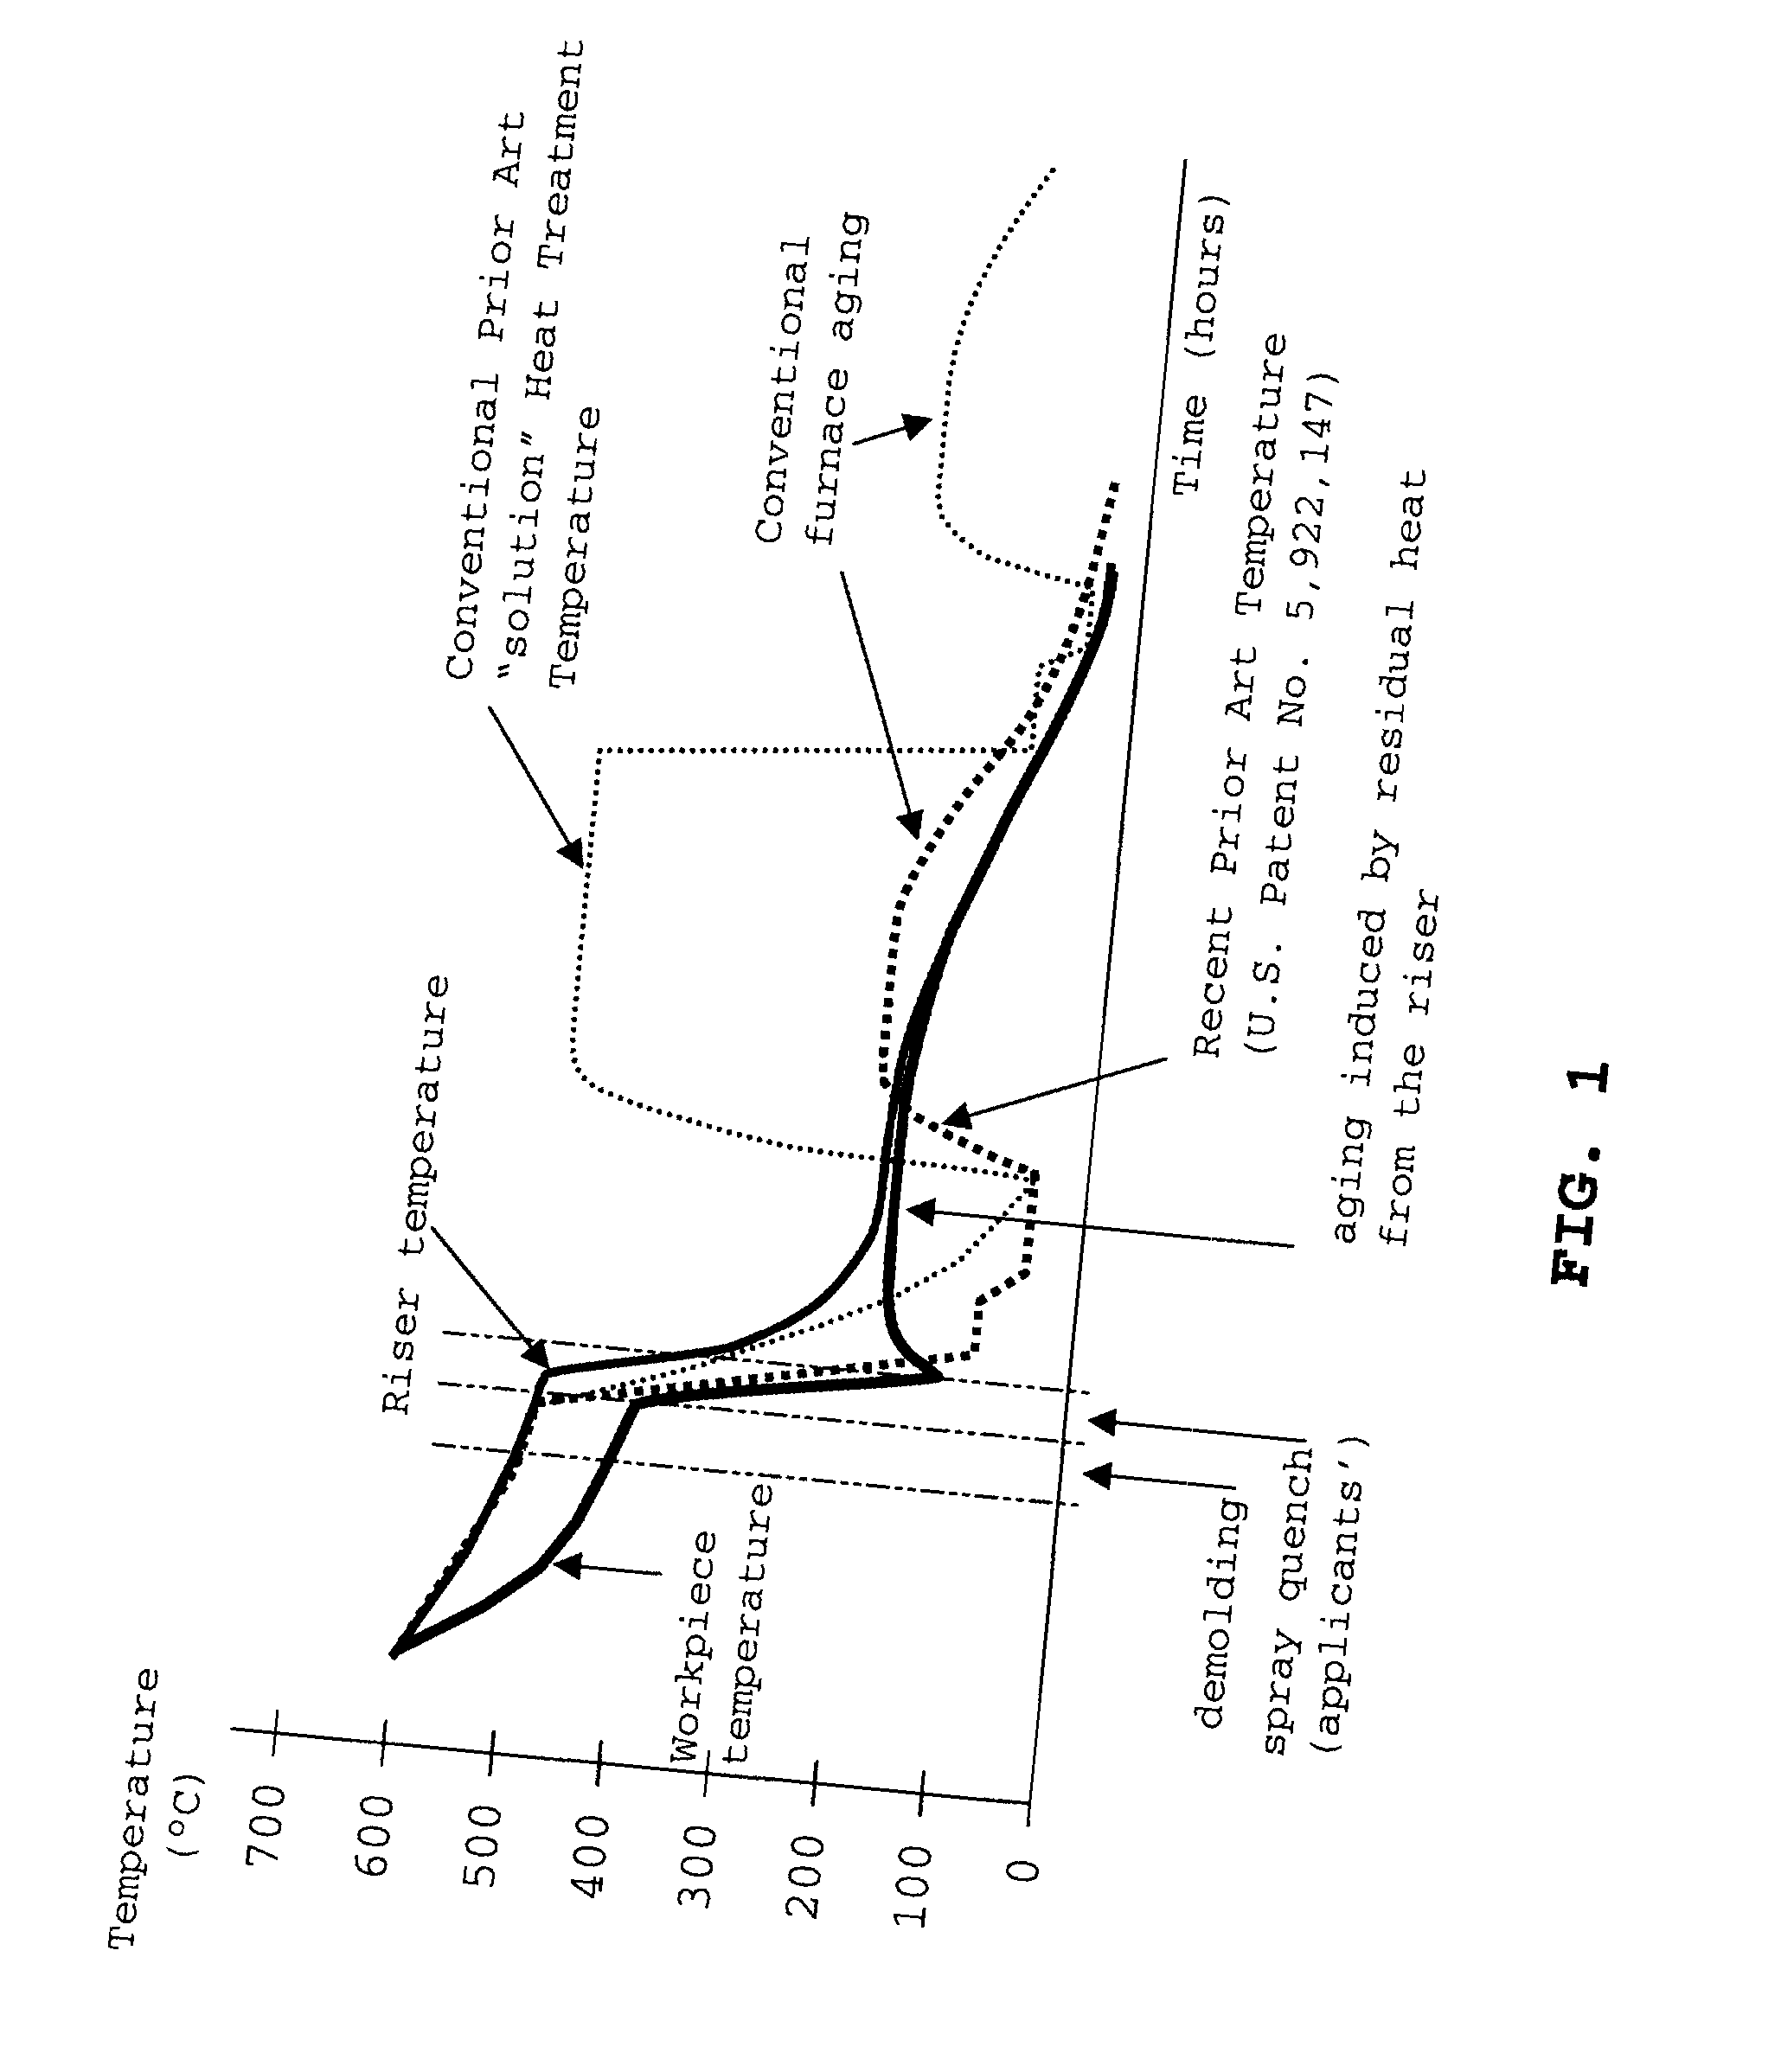 Apparatus for simplified production of heat treatable aluminum alloy castings with artificial self-aging